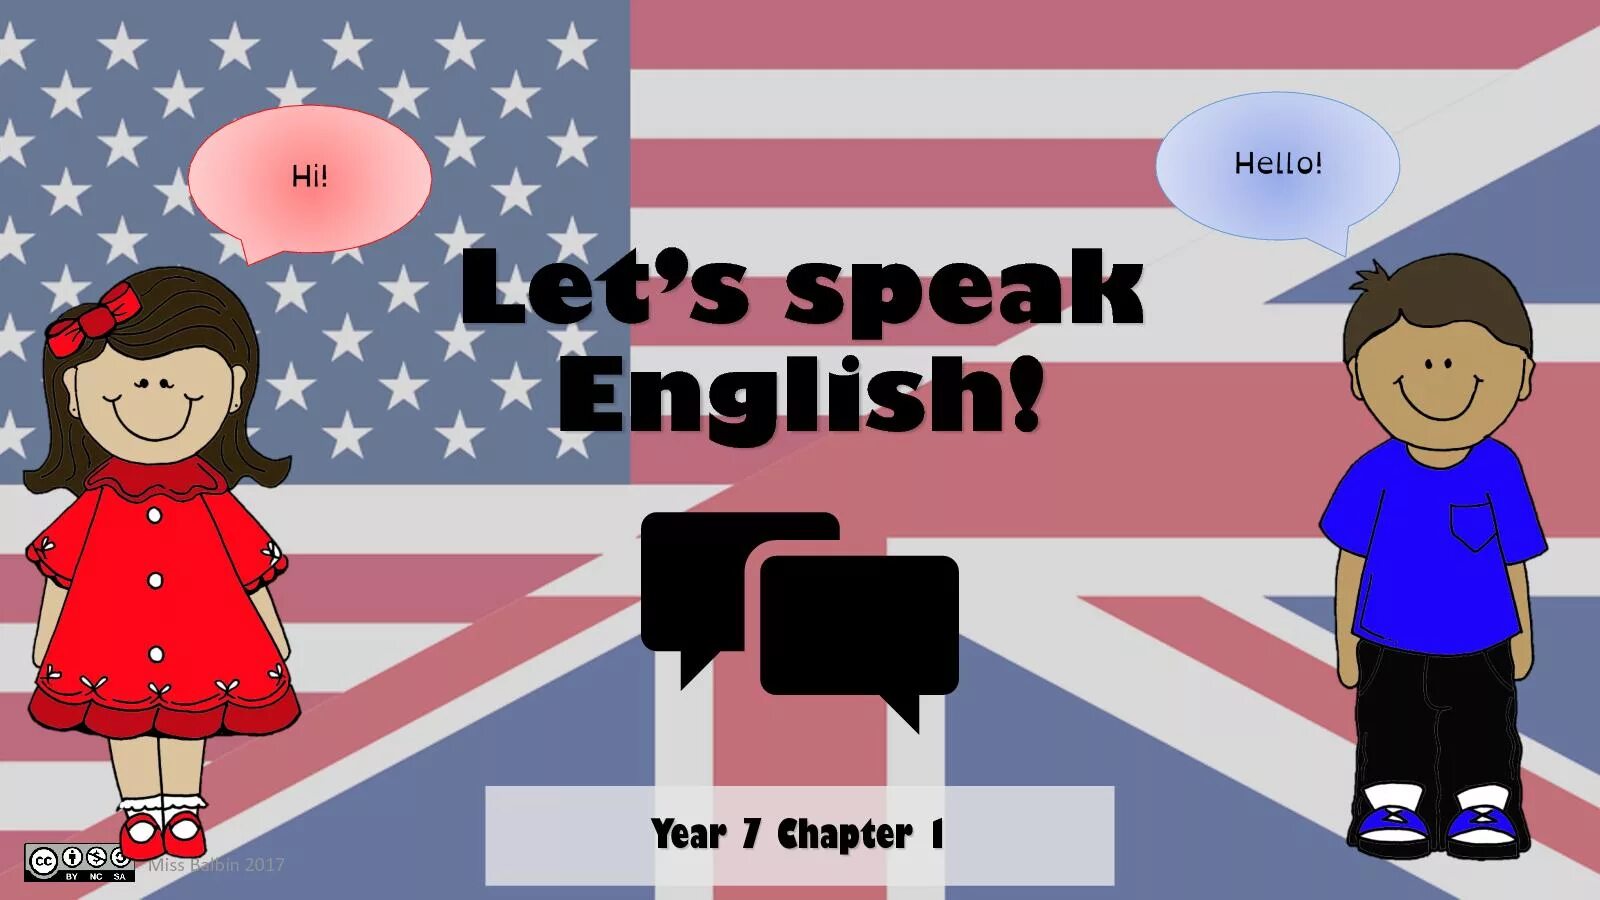 Let's speak English. Lets speak in English. Lets speak English картинка. Speak English картинка для детей. I speak english very well